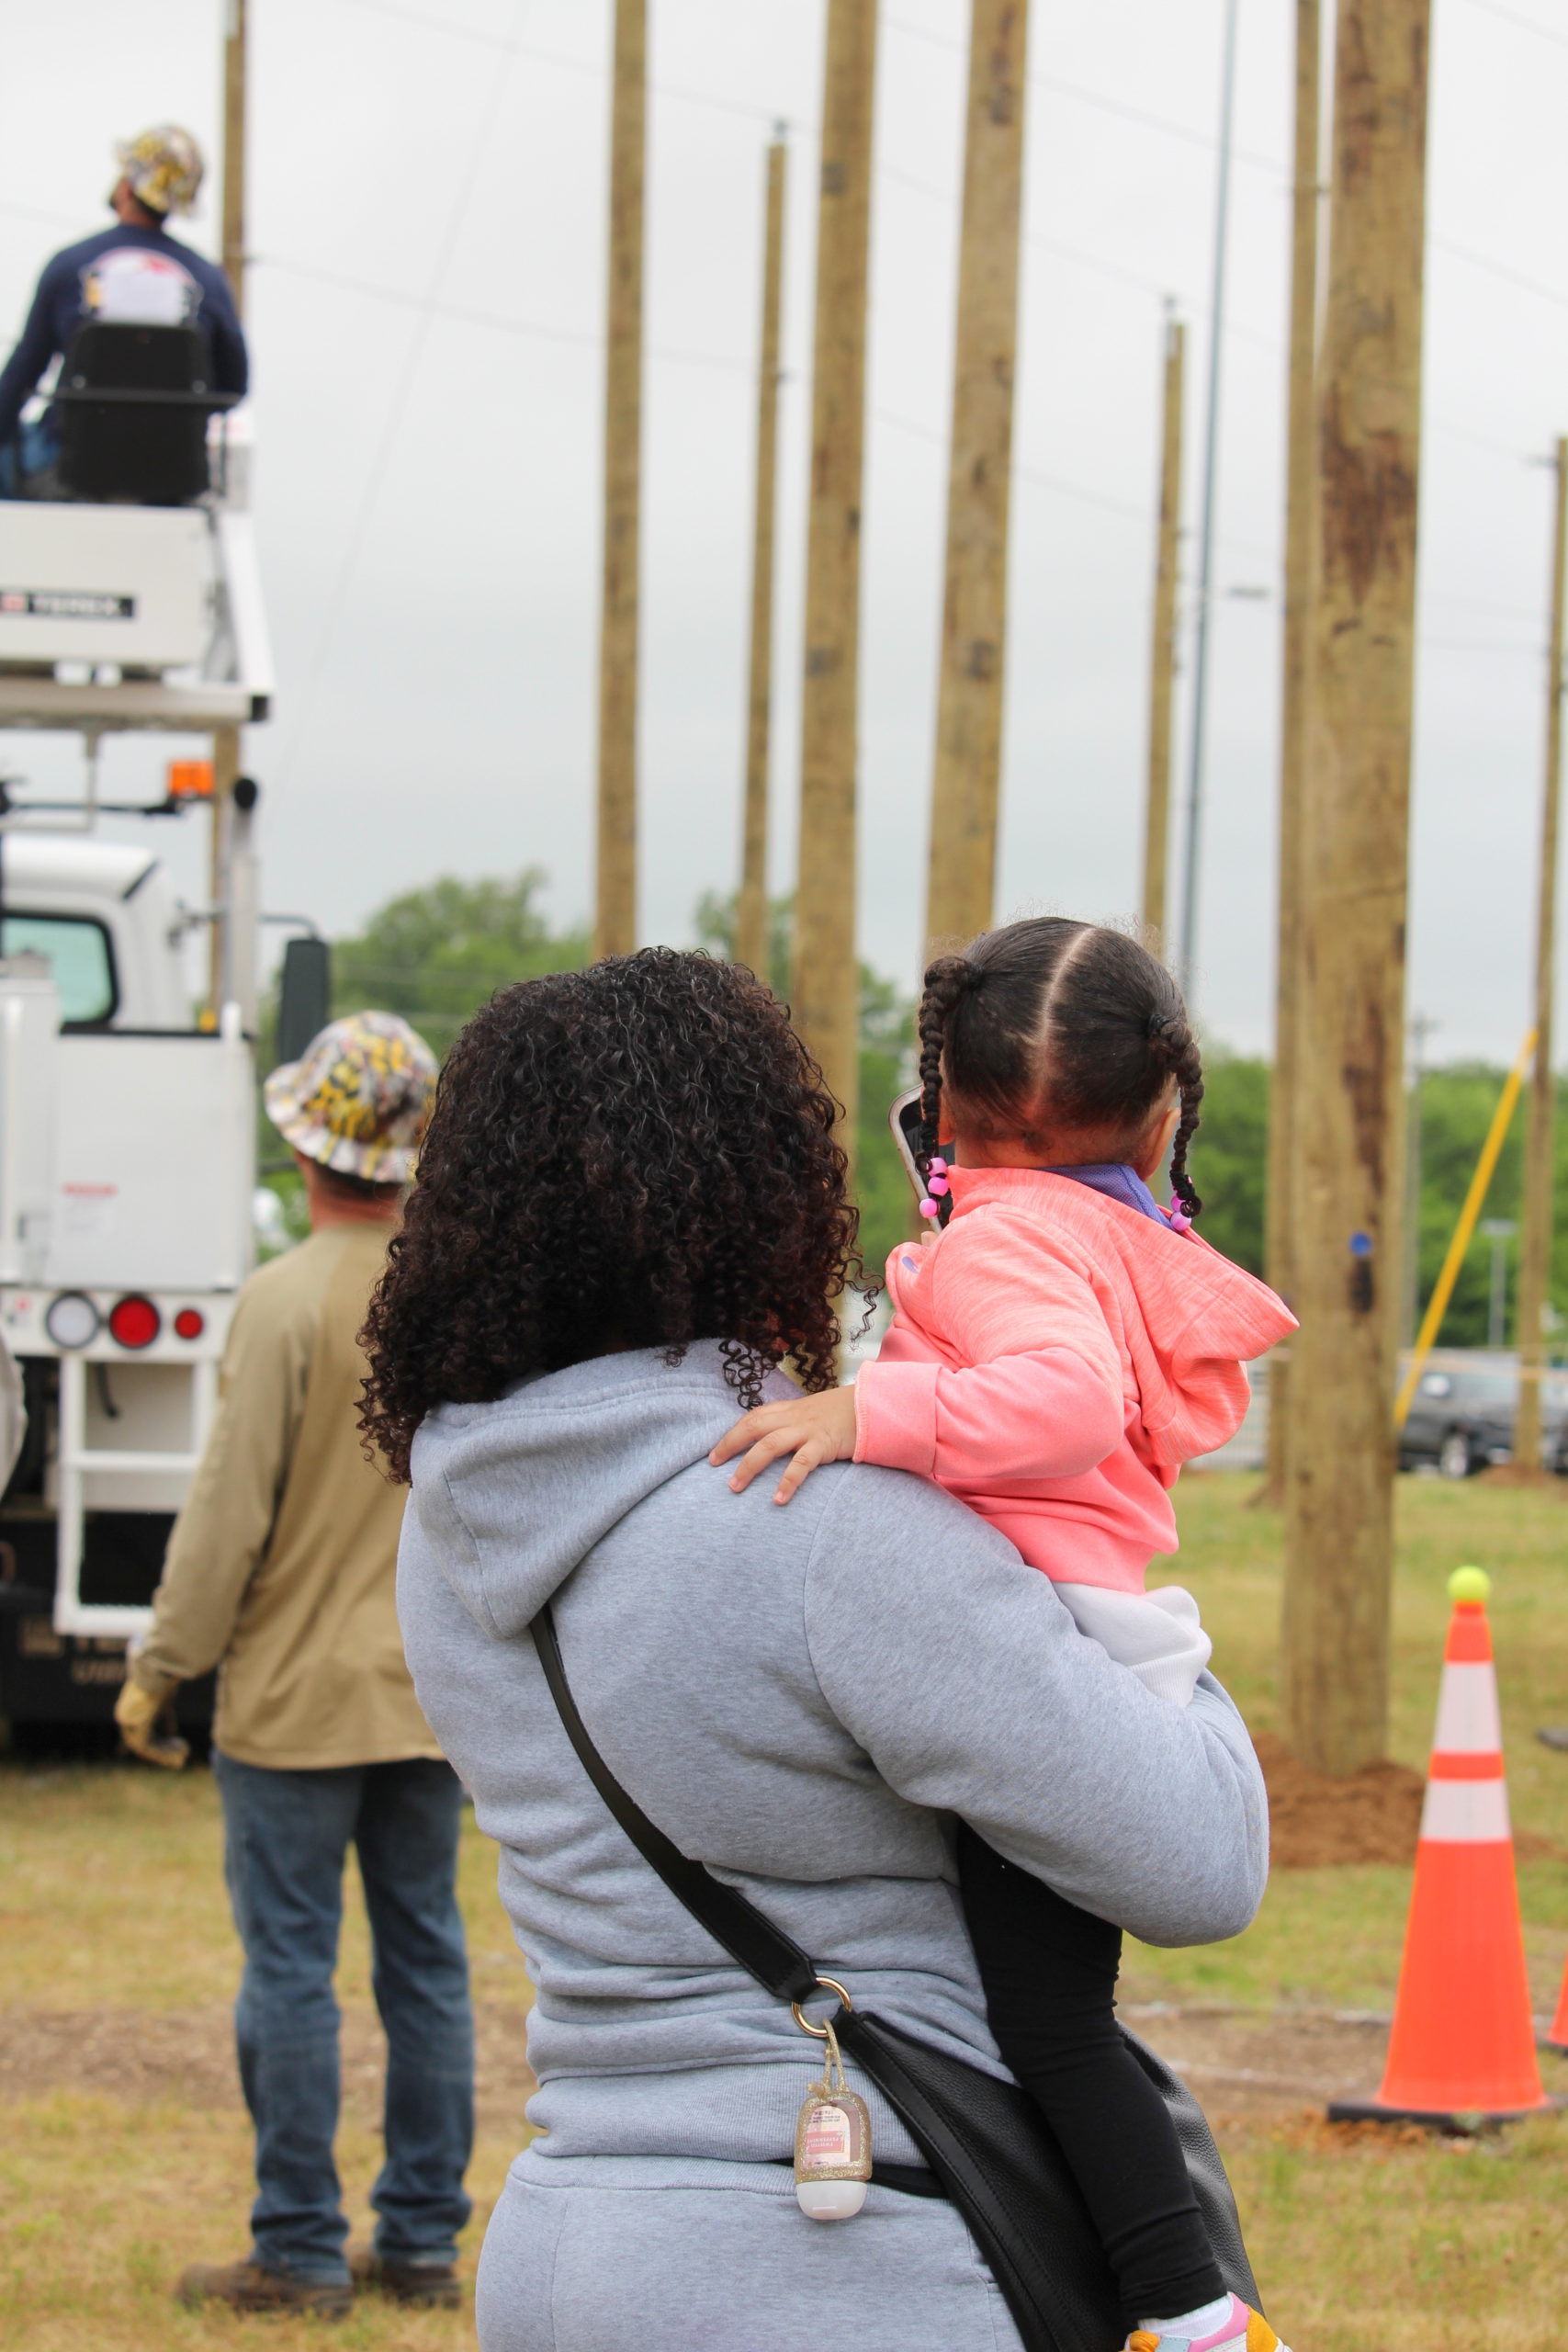 Jasmine Forward watches along with her young daughter as her husband, REC lineworker Tony Forward, competes in the Equipment Operator’s Rodeo.